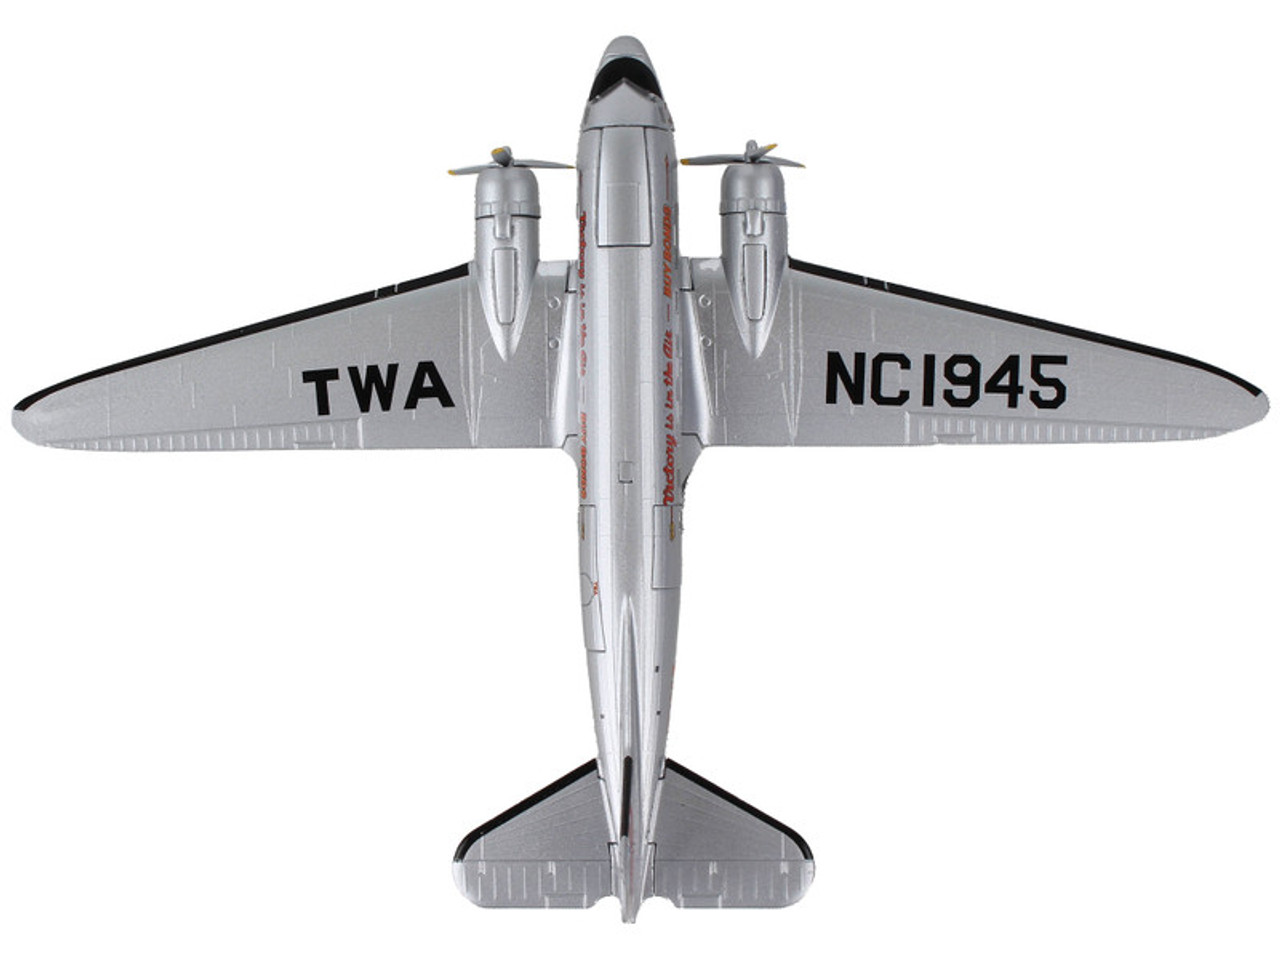 Douglas DC-3 Passenger Aircraft "Trans World Airlines - Victory is in the Air" 1/144 Diecast Model Airplane by Postage Stamp